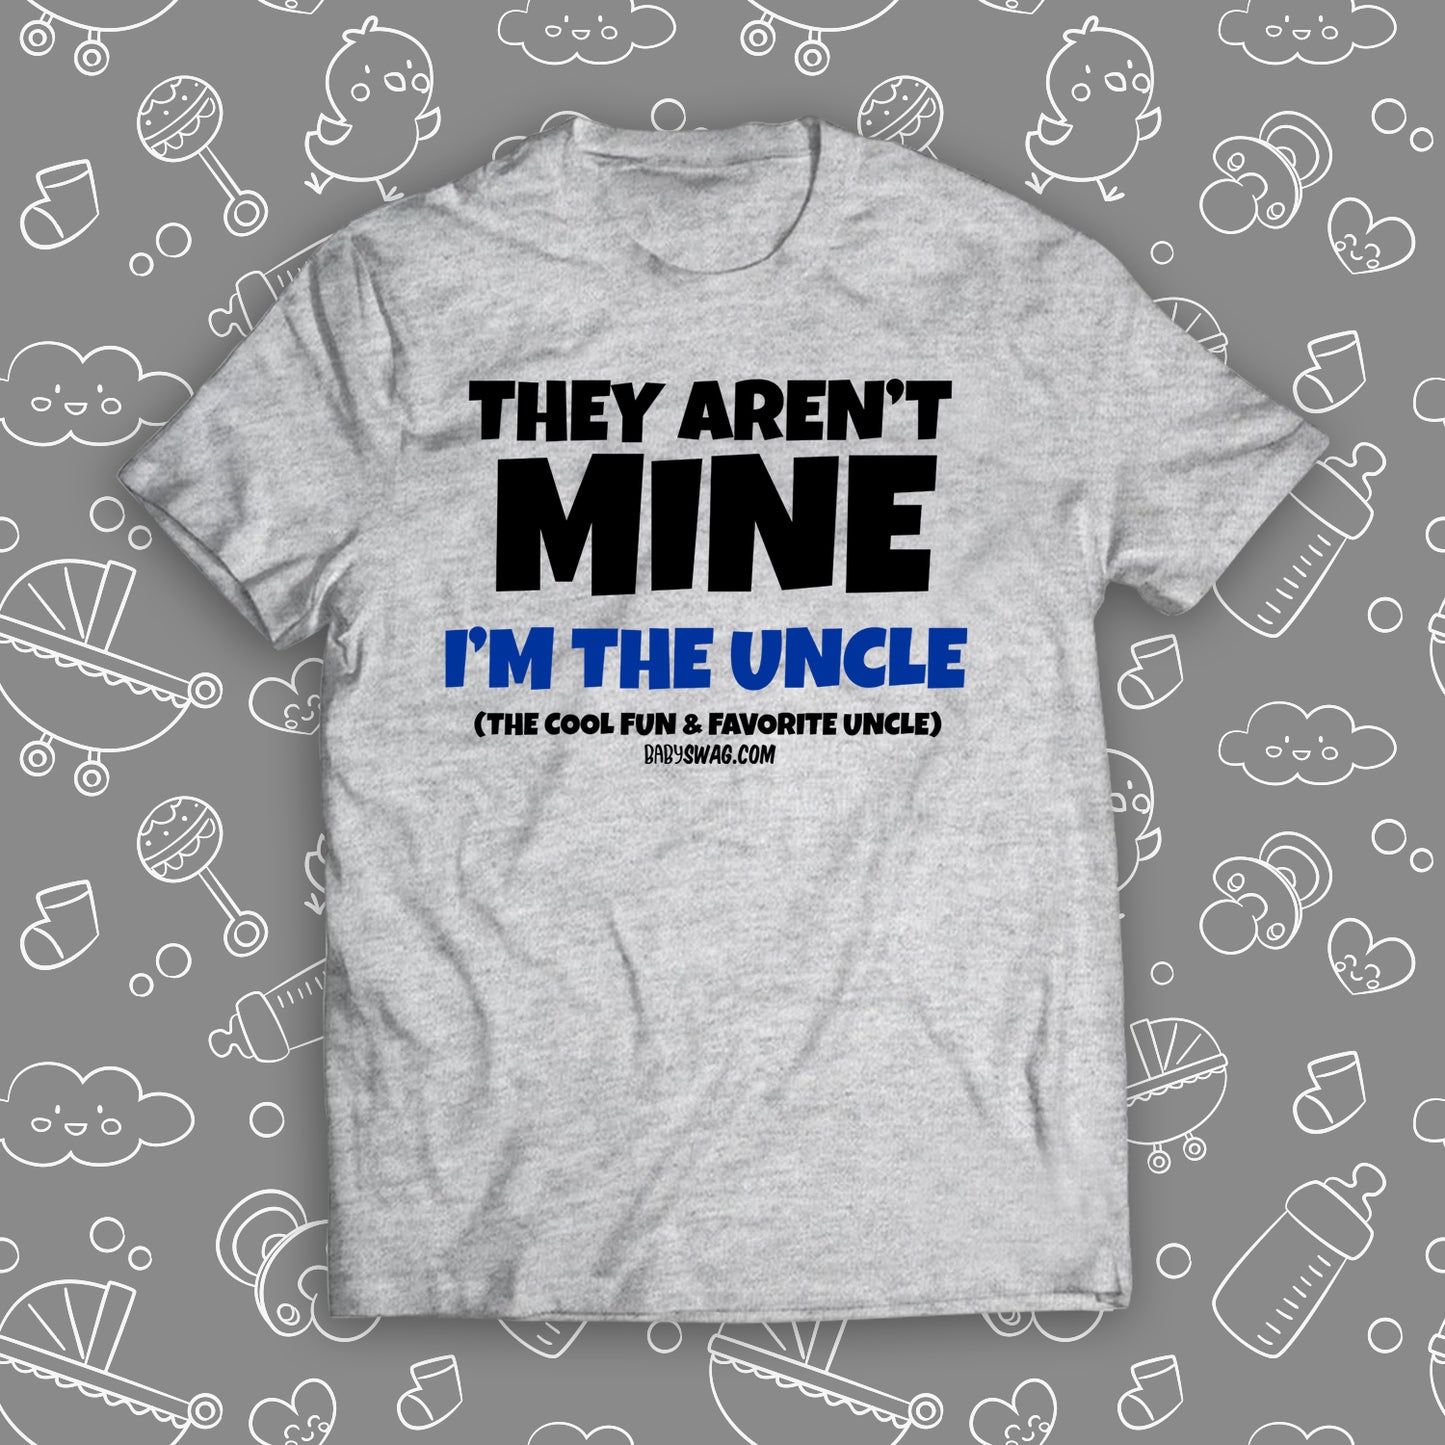 They Aren't Mine, I'm The Uncle